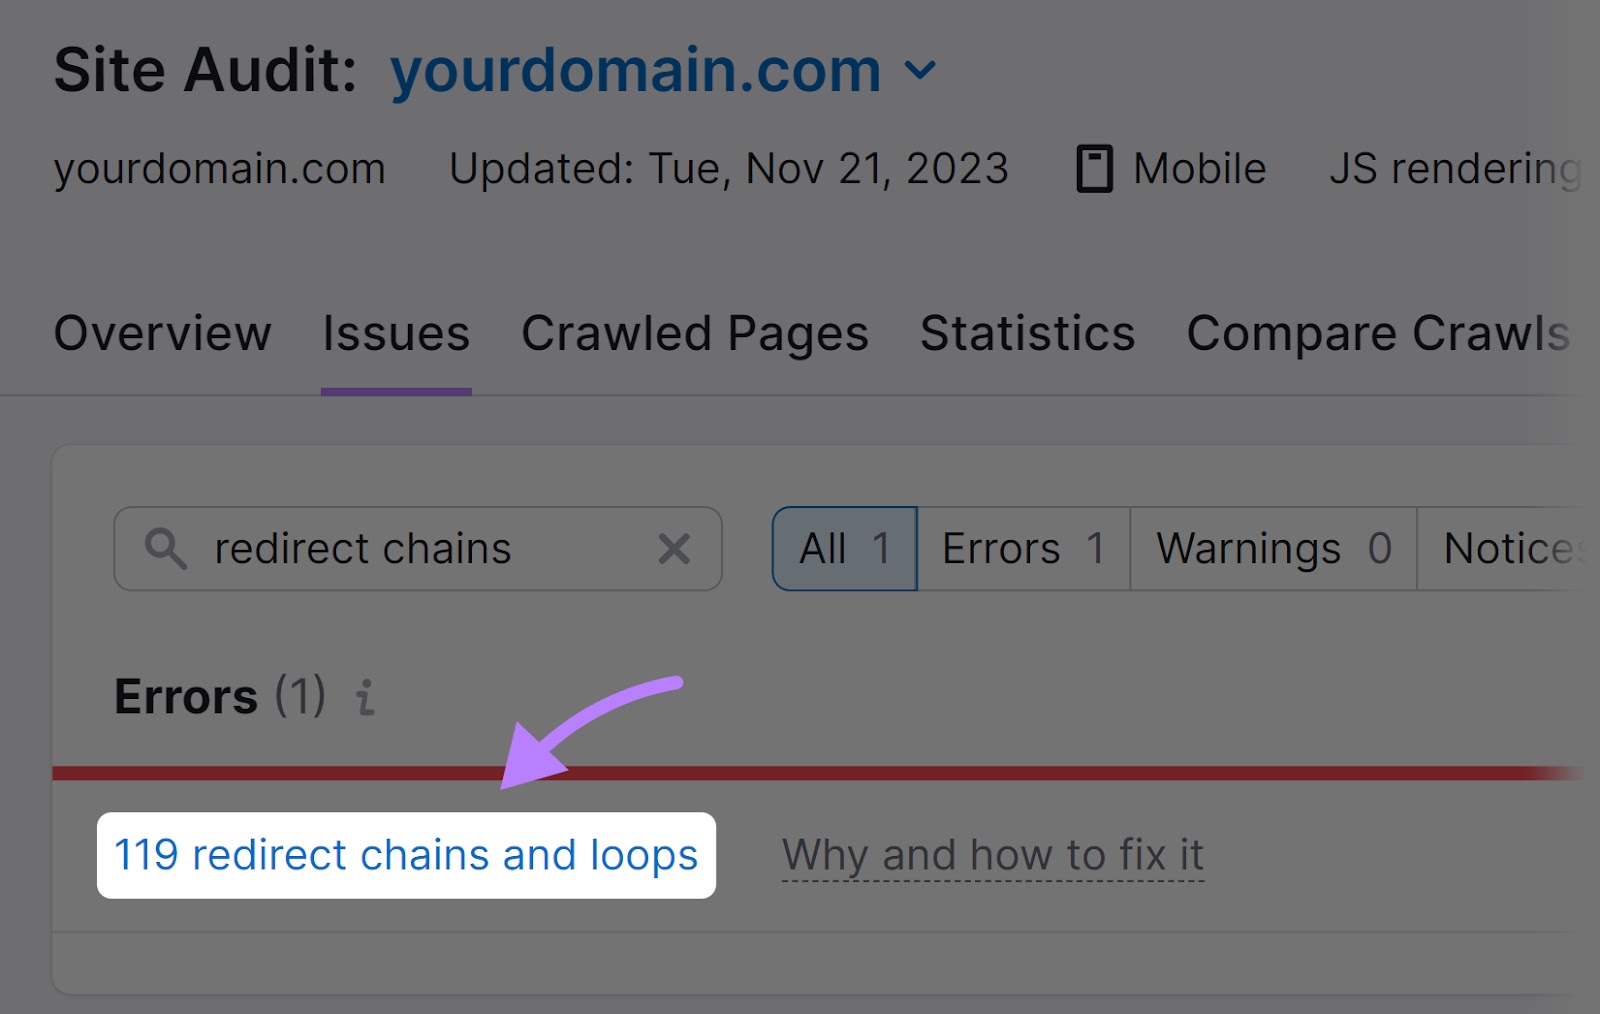 “119 redirect chains and loops” result highlighted under "Issues" tab